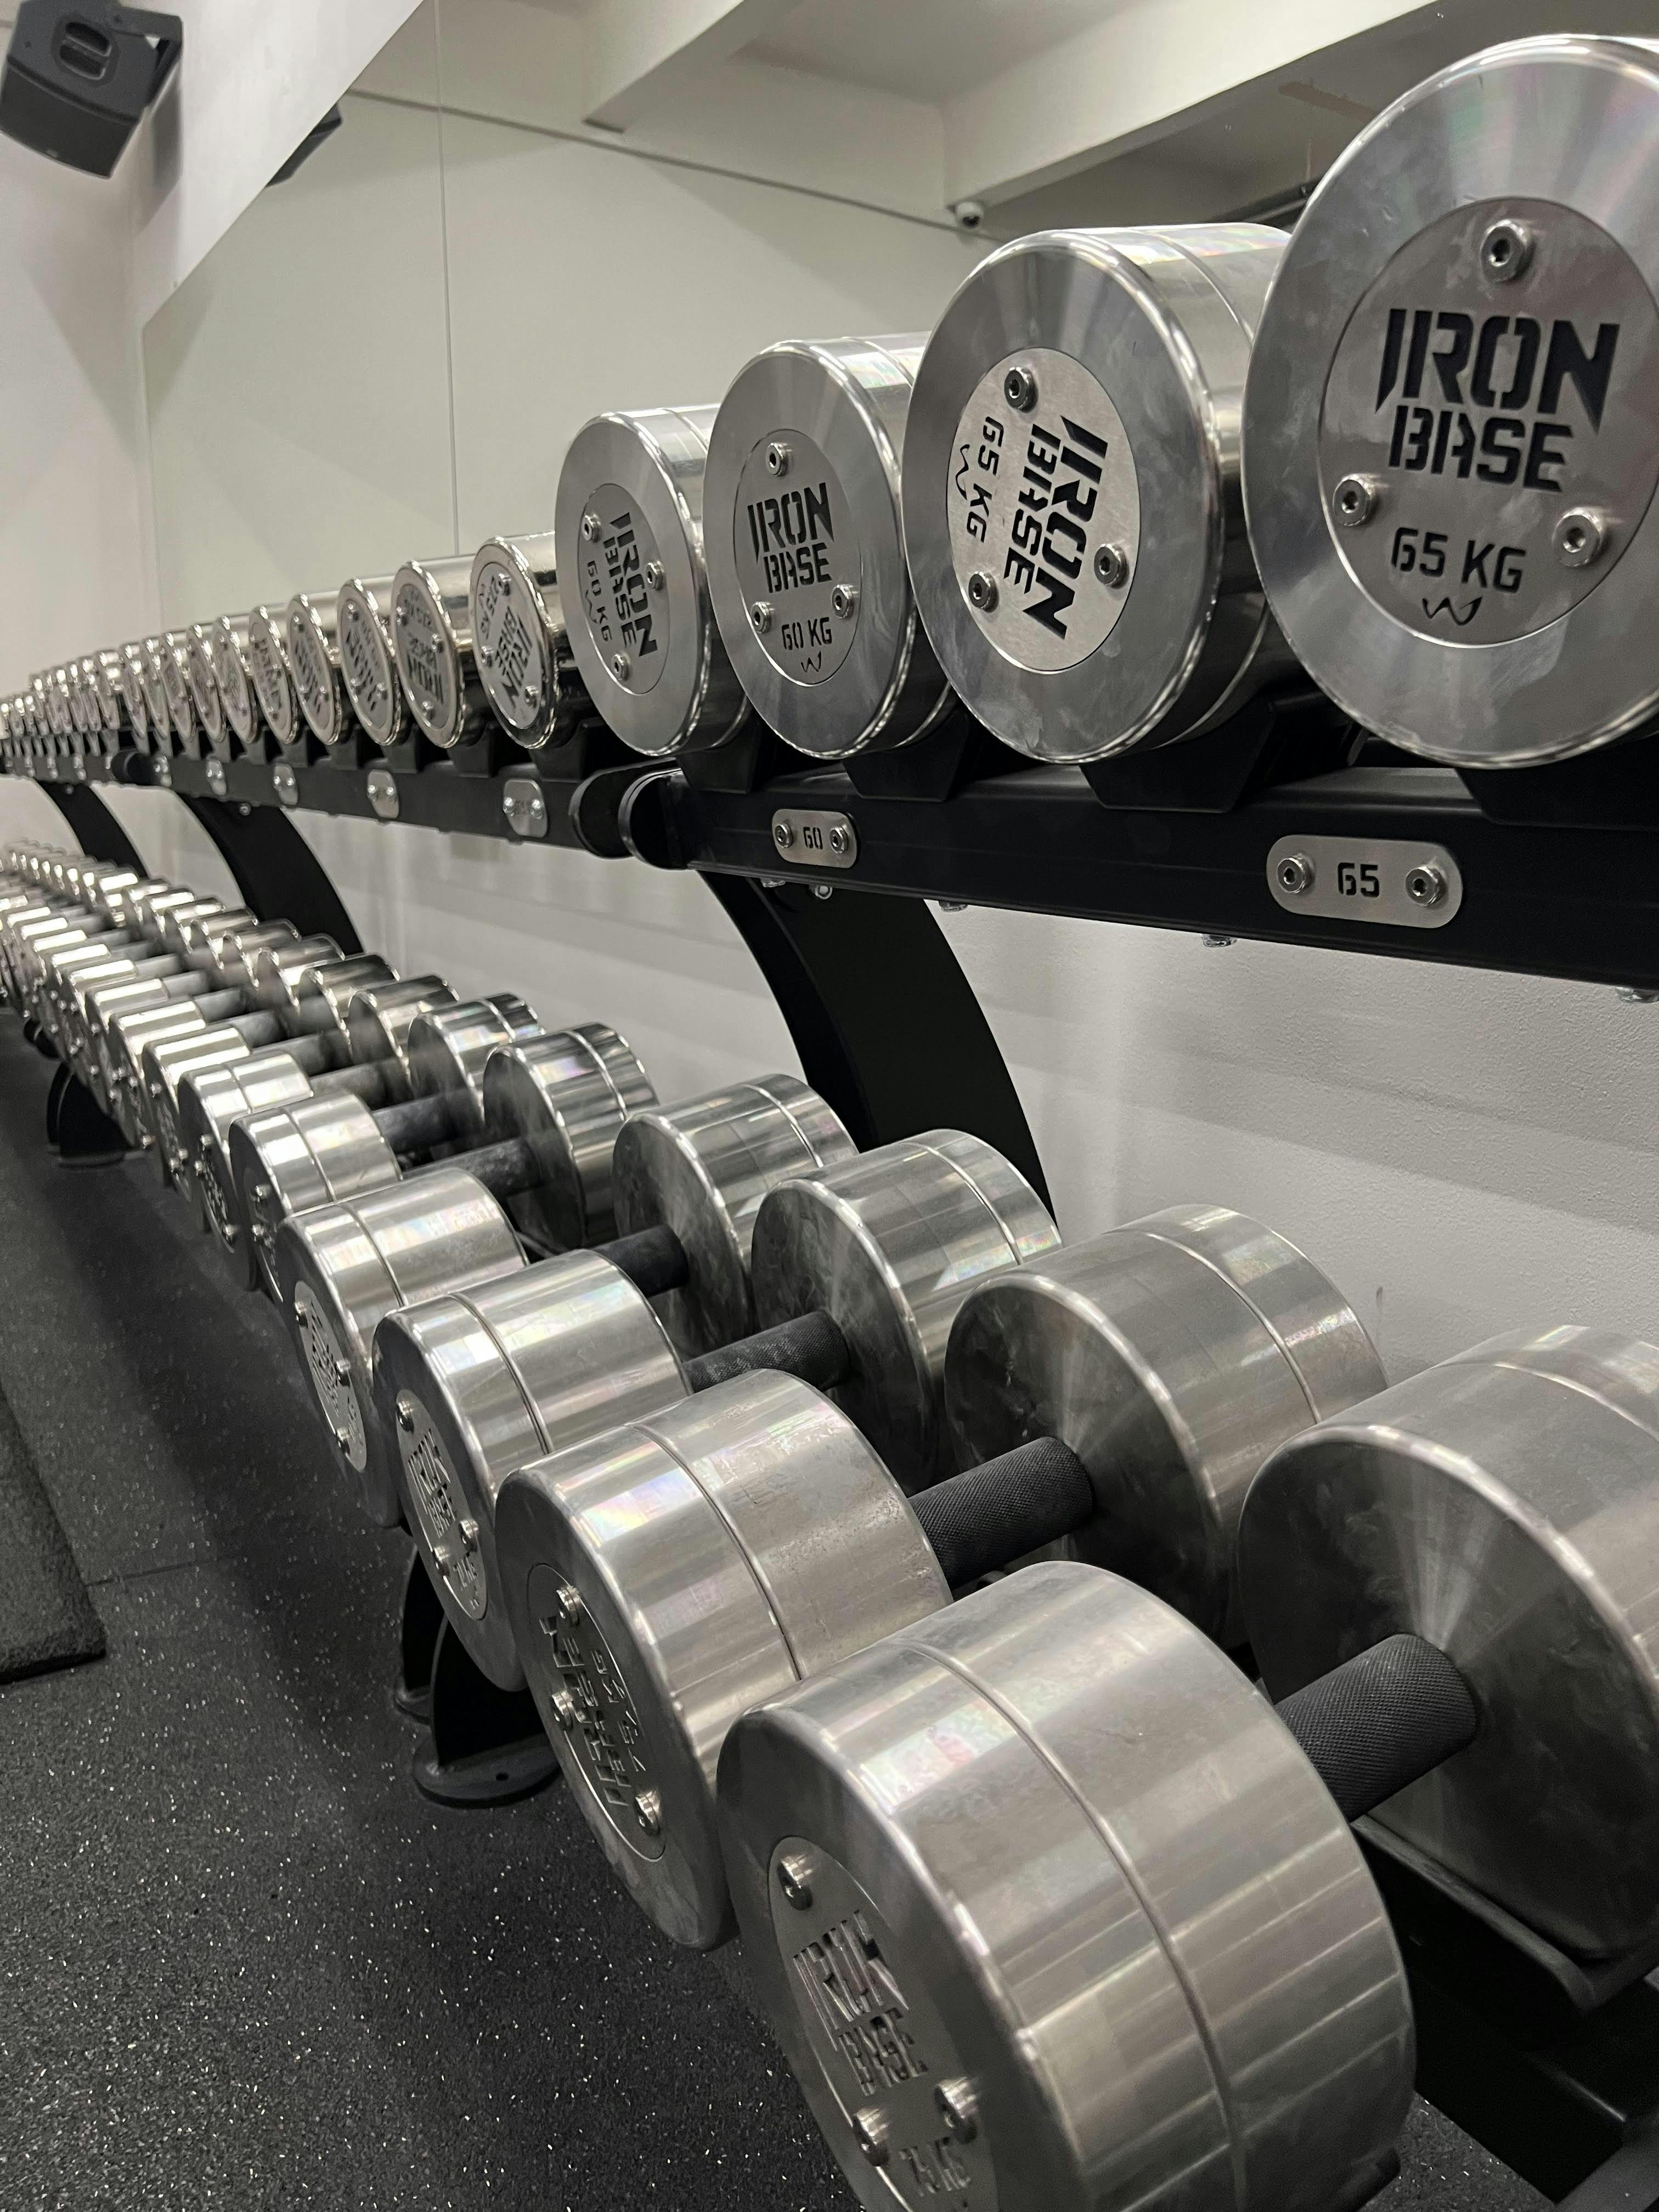 Take a look at what it looks like here. At Iron Base, you'll find the best strength equipment used by top athletes from around the world.